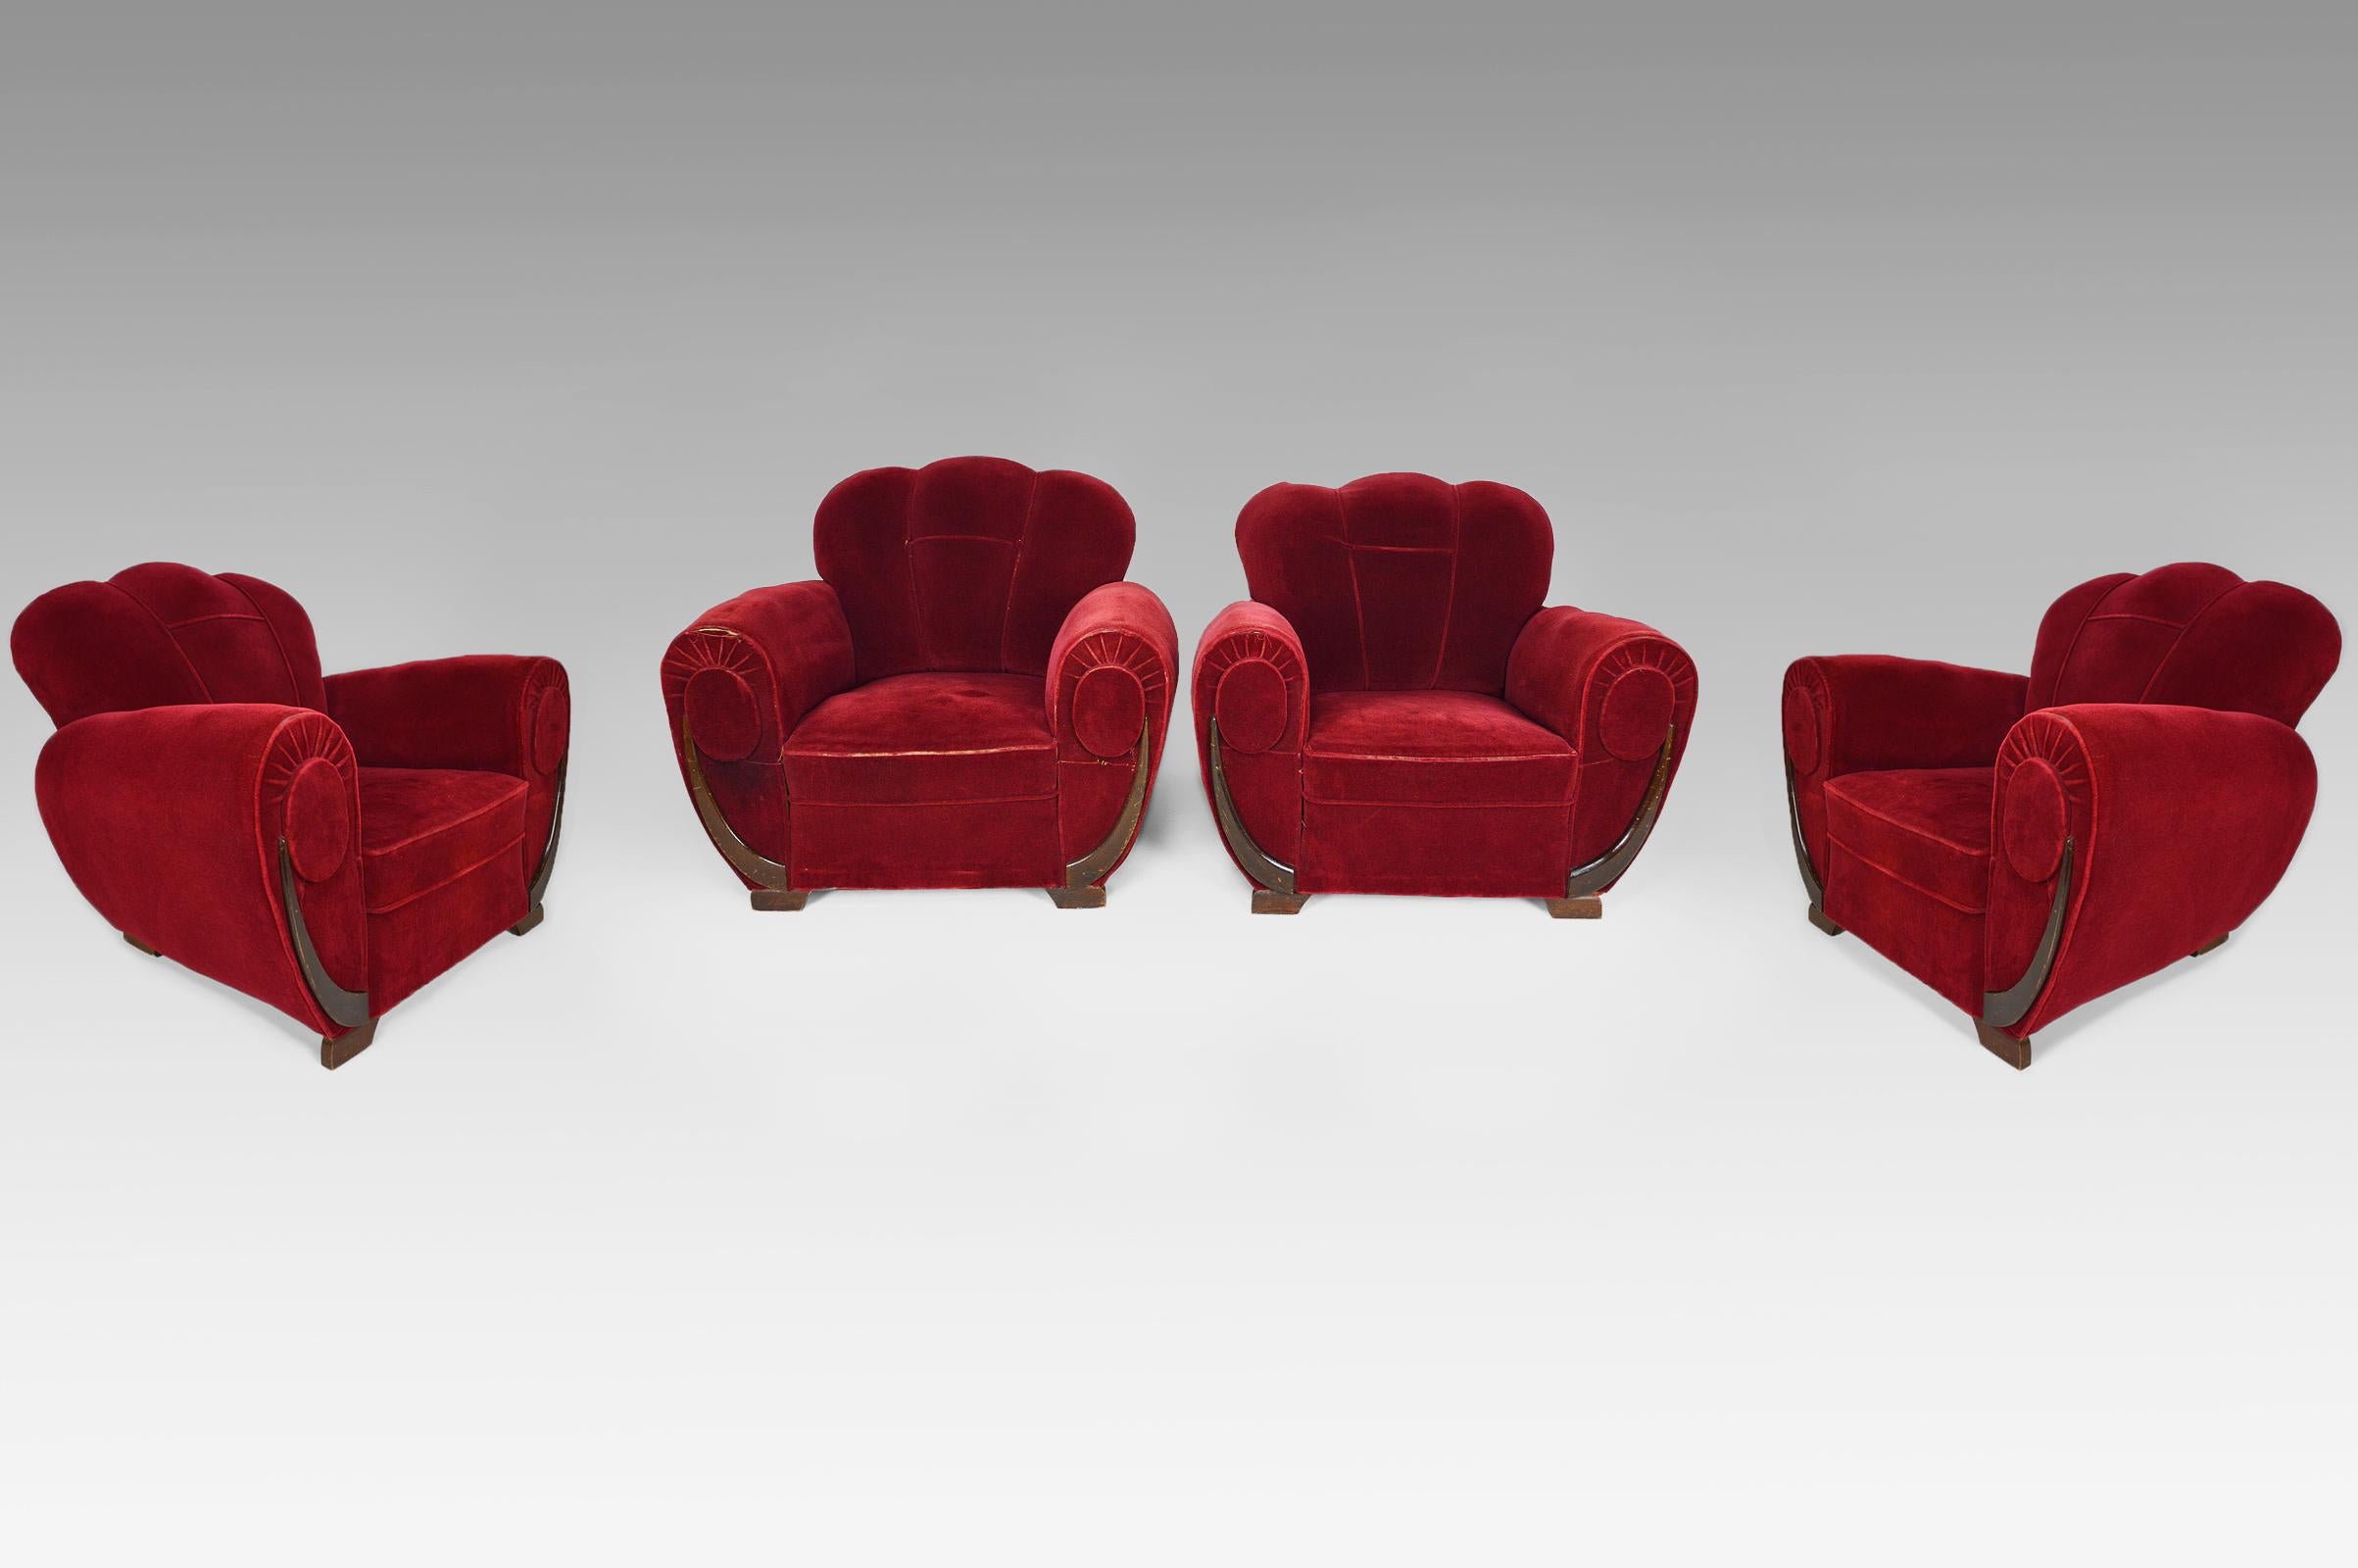 Rare set of 4 large and comfortable club chairs.
In red velvet fabric, with wooden legs.

Art Deco, France, around 1930-1940.
Decorator work to be identified.

In used condition. Original fabric and upholstery, wear to the